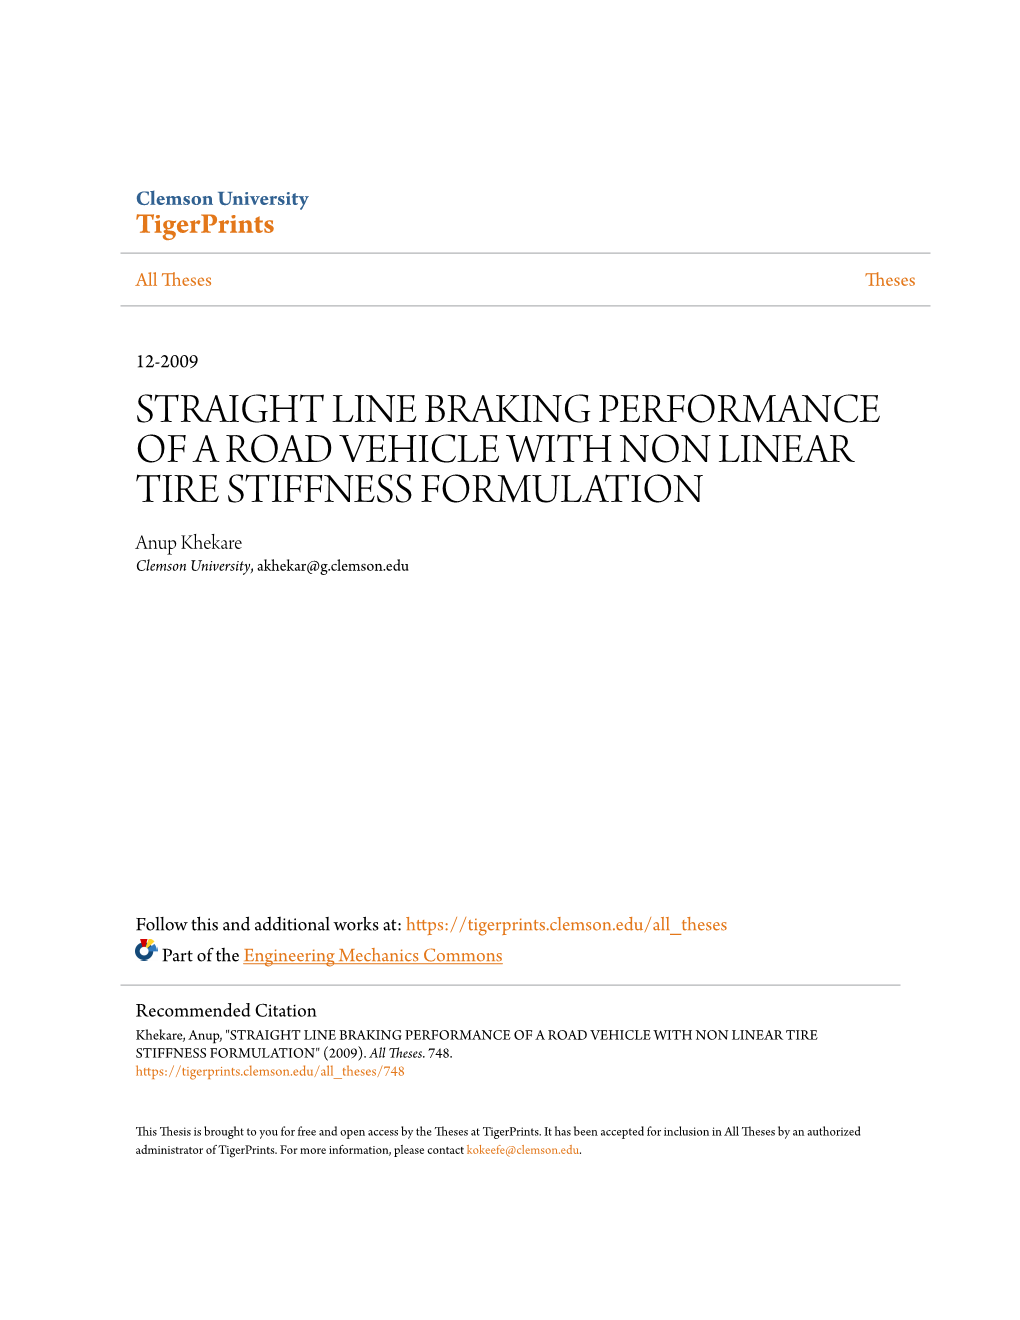 Straight Line Braking Performance of a Road Vehicle with Non Linear Tire Stiffness Formulation" (2009)